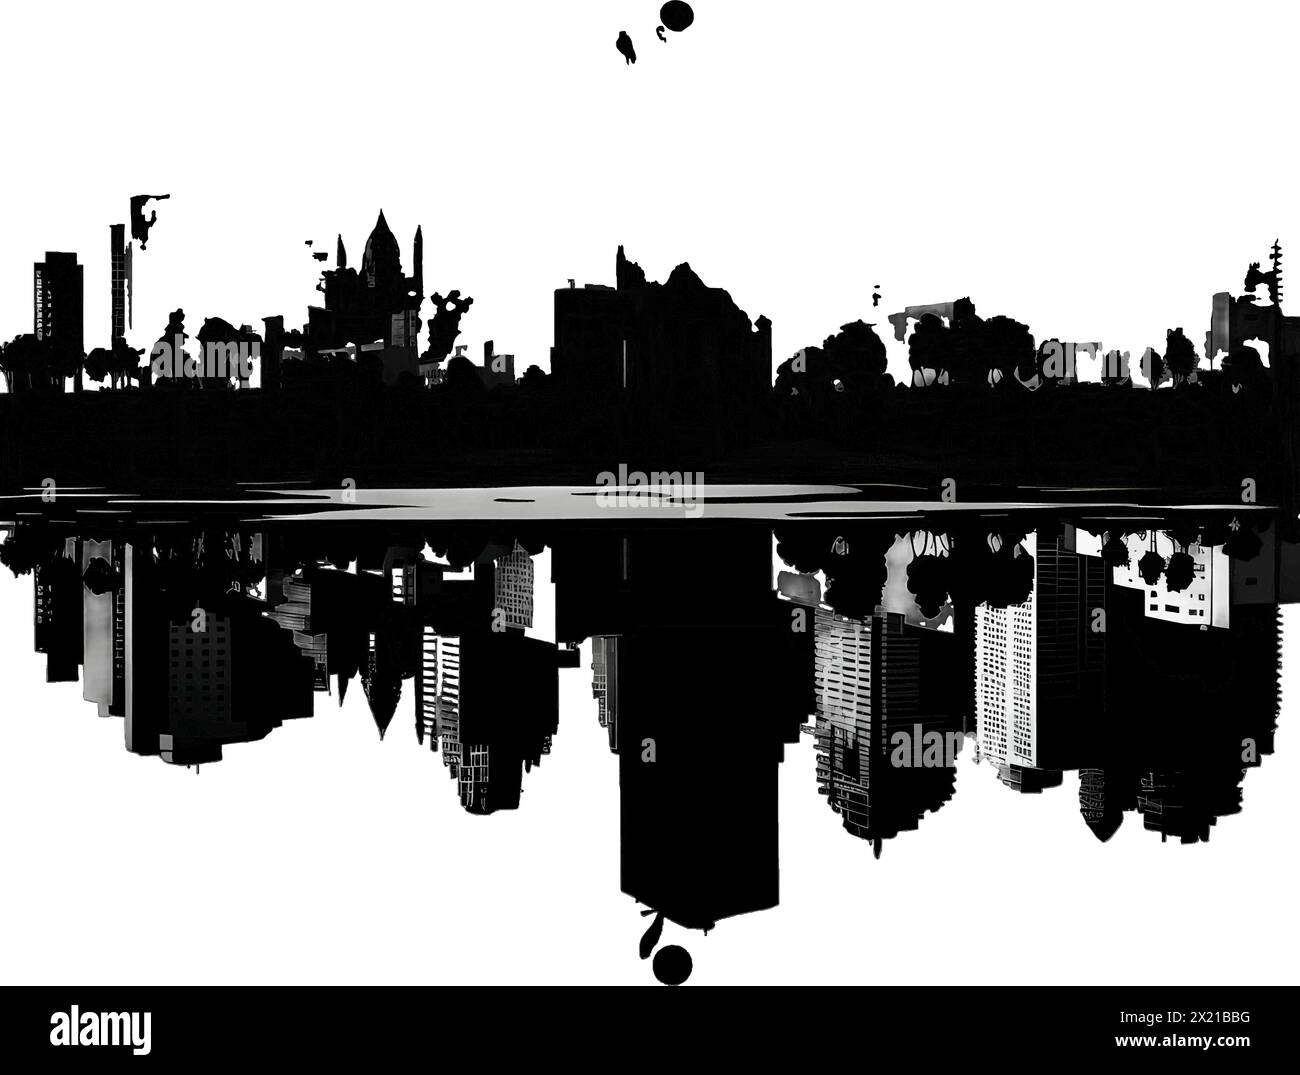 Vector illustration of city skylines in black silhouette against a clean white background, capturing graceful forms. Stock Vector